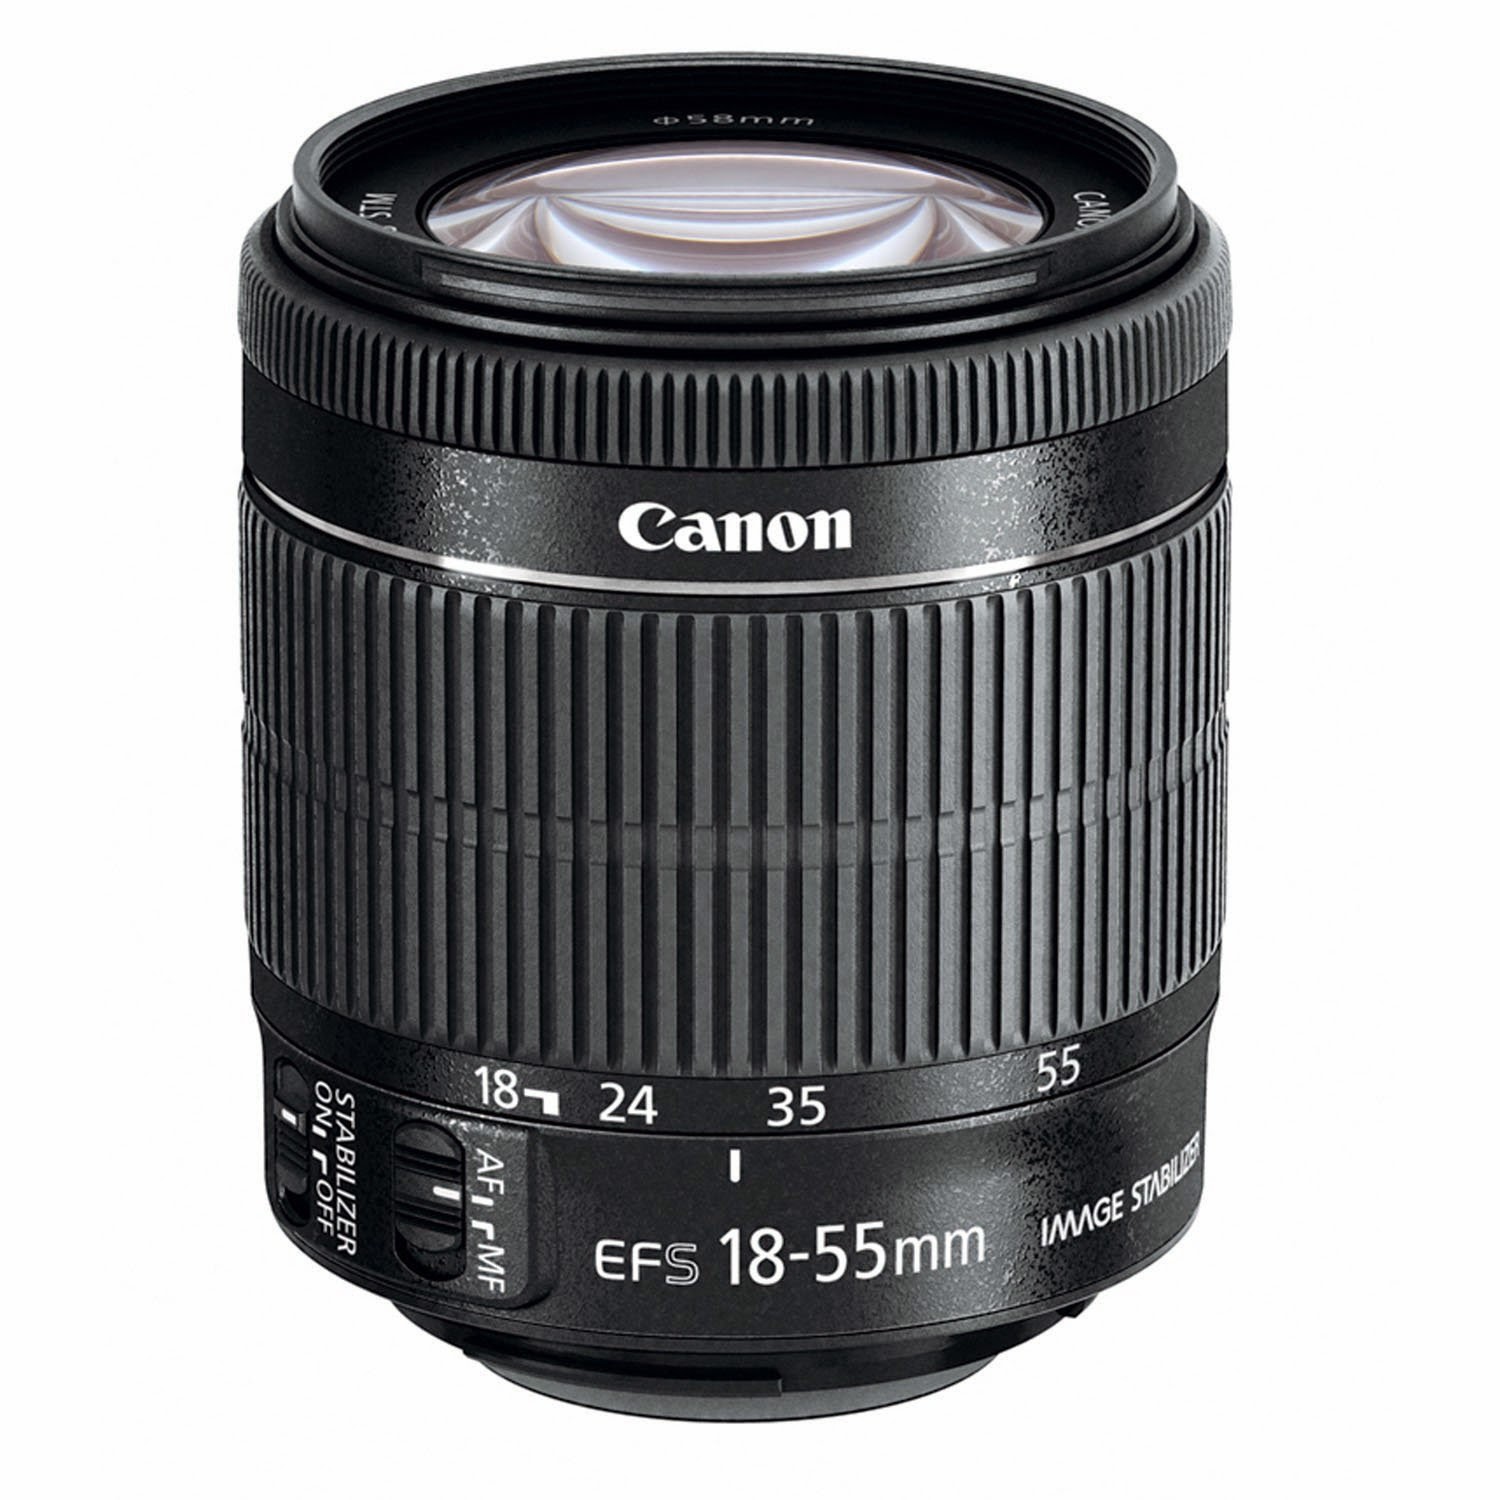 Canon 28-55mm EF-S IS STM Lens, review, compatible with Canon EOS Rebel T5i  DSLR